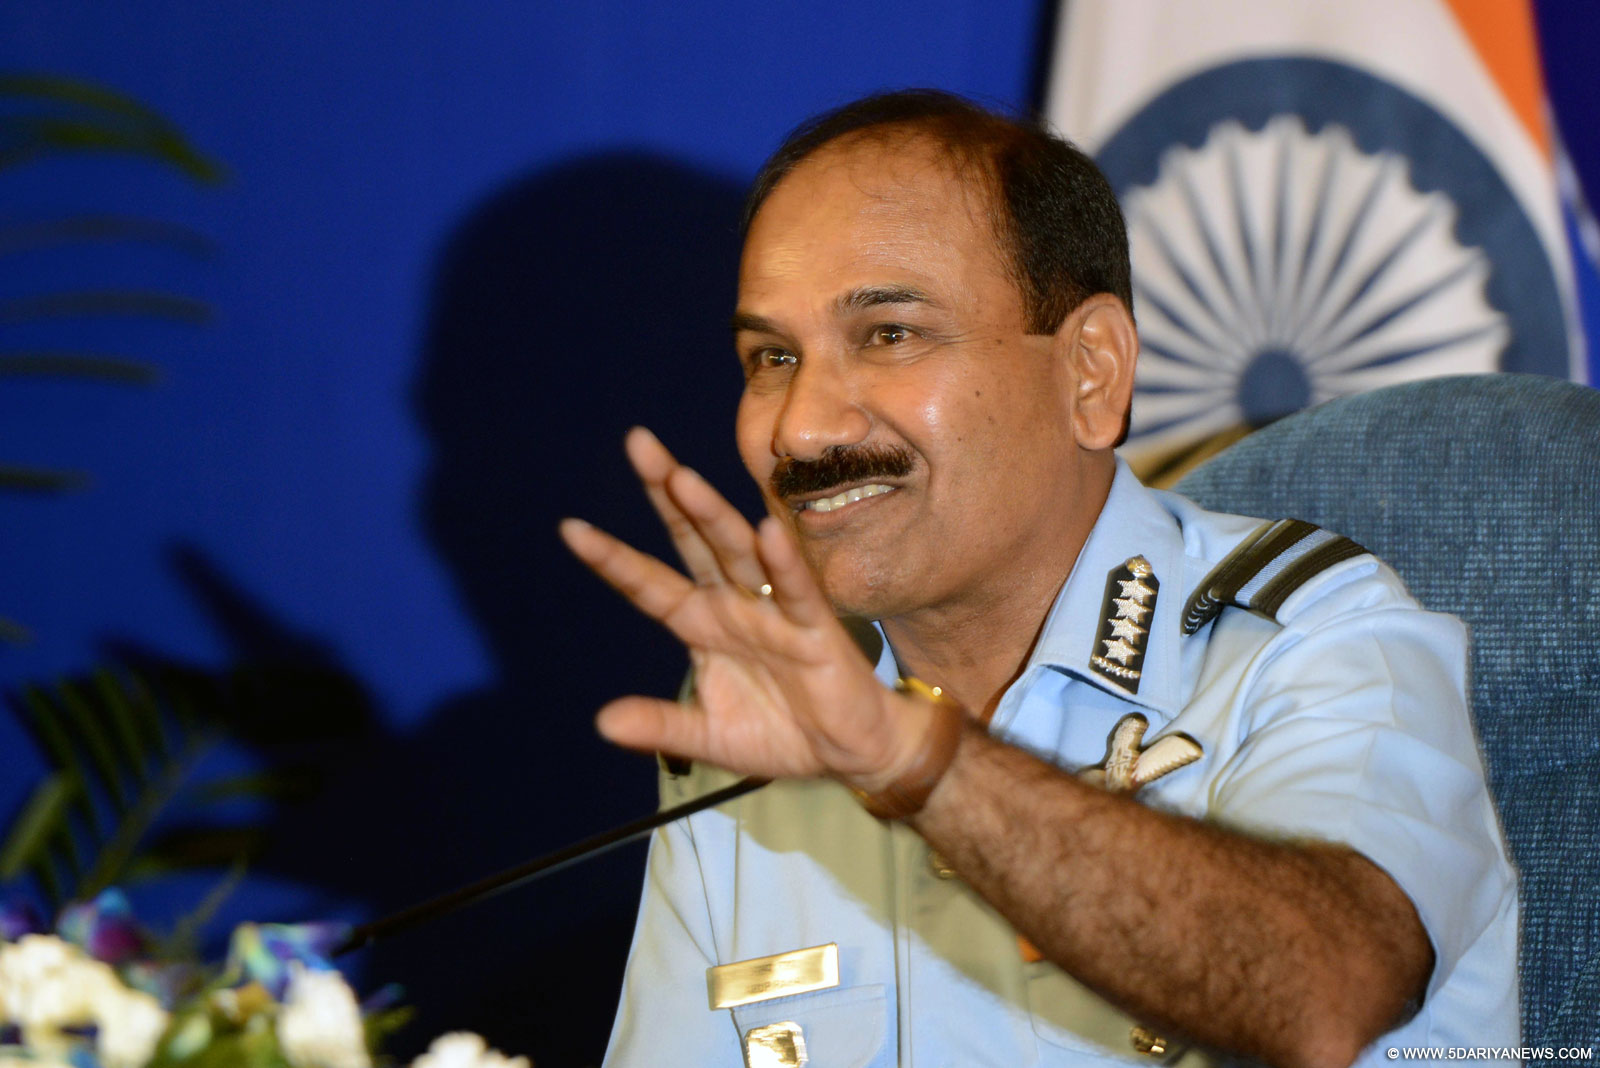 Women fighter pilots: IAF chief playing to the gallery?